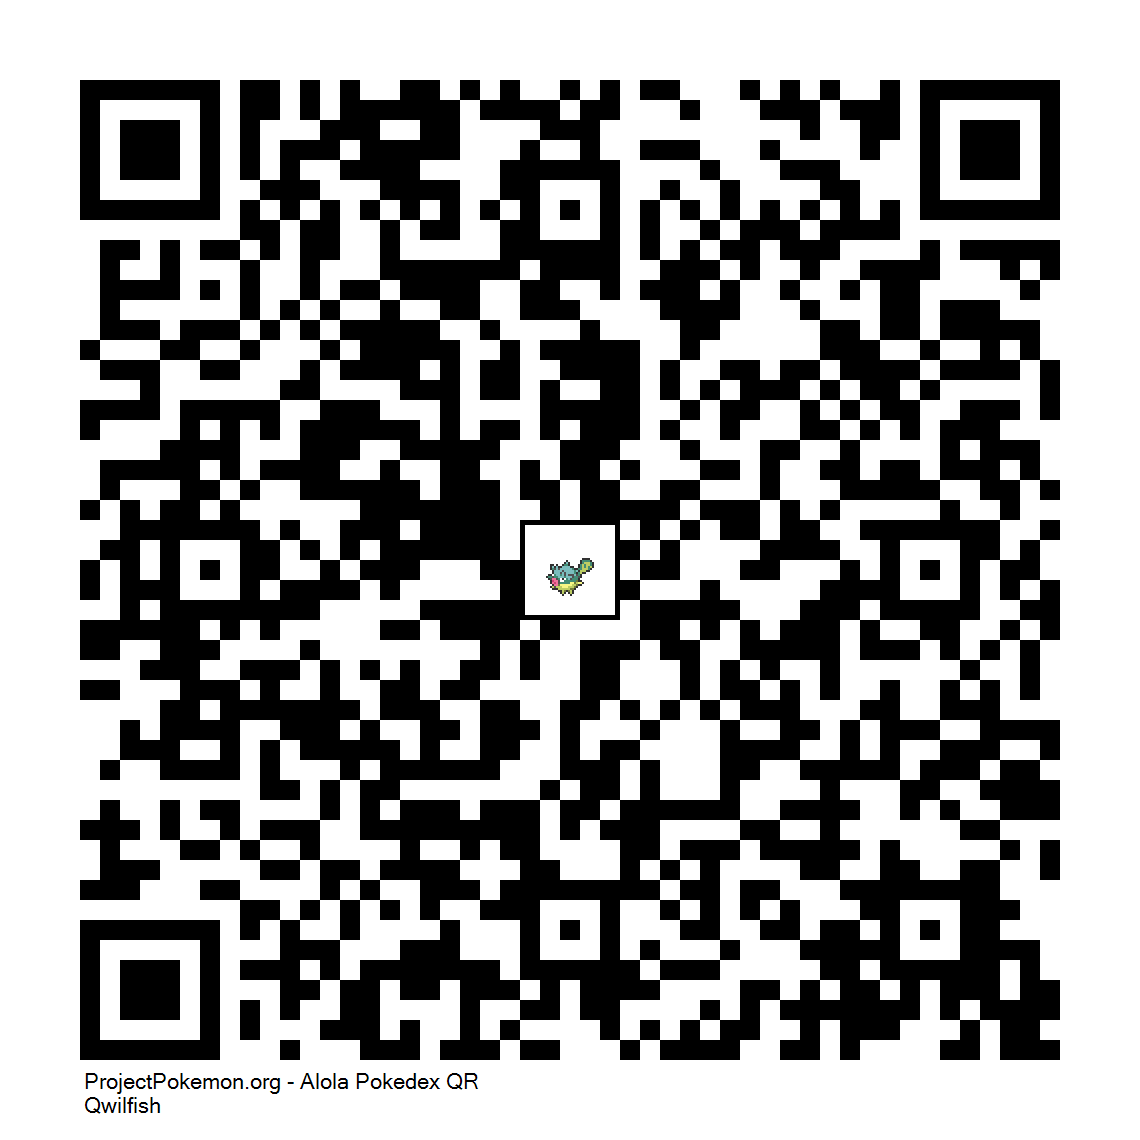 211 Qwilfish Png Generation 7 Qr Codes Project Pokemon Forums